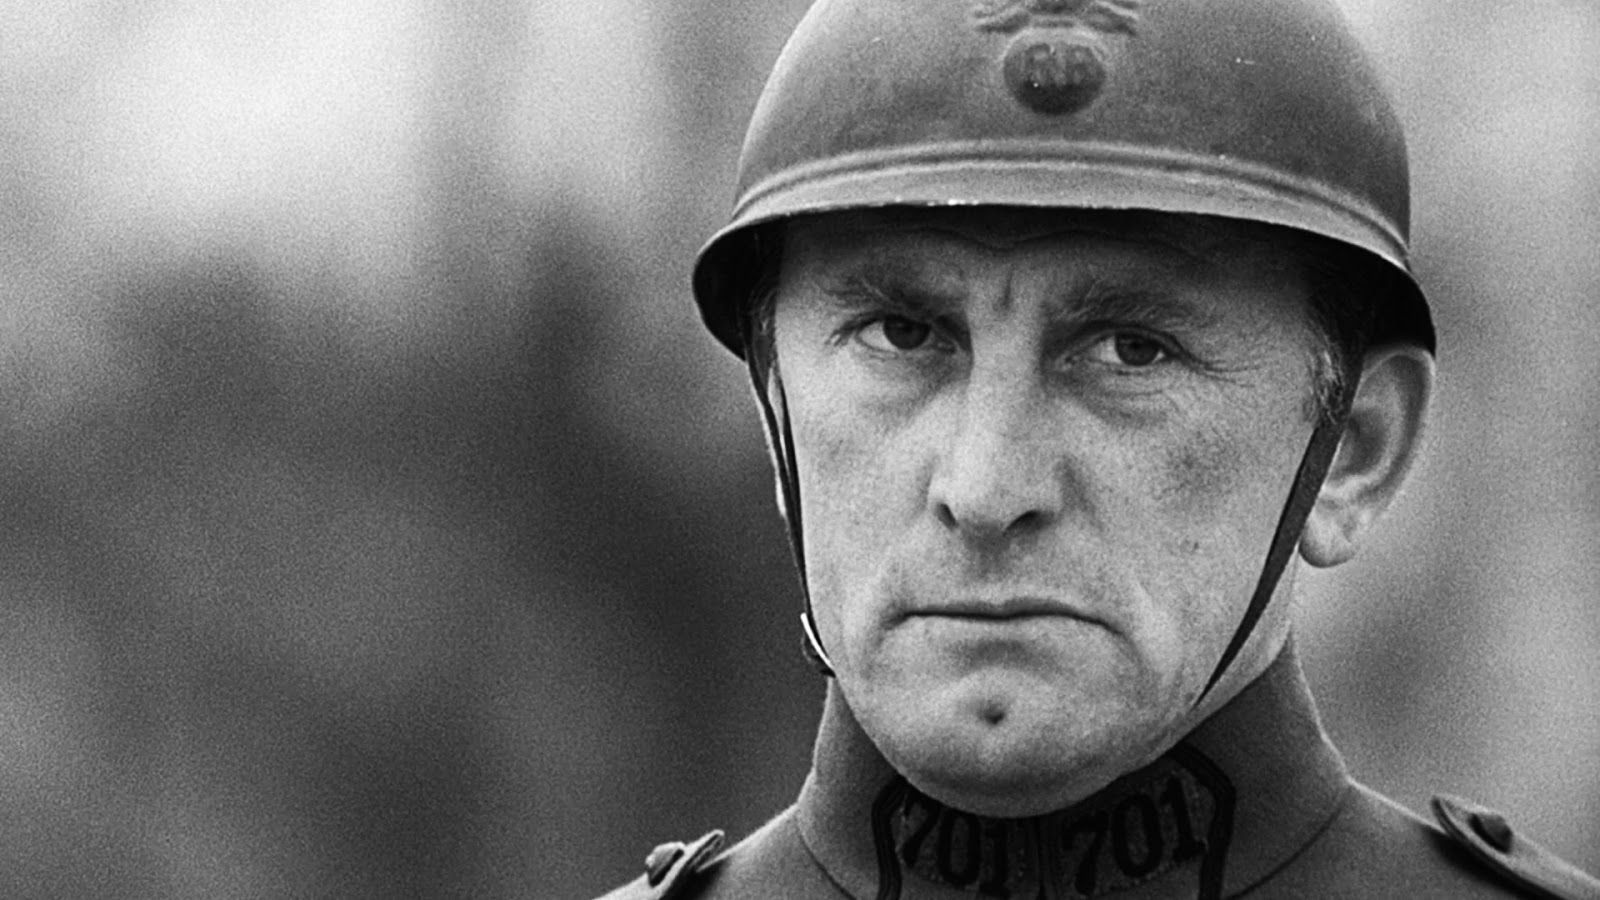 War on Film: Paths of Glory. Military History Matters